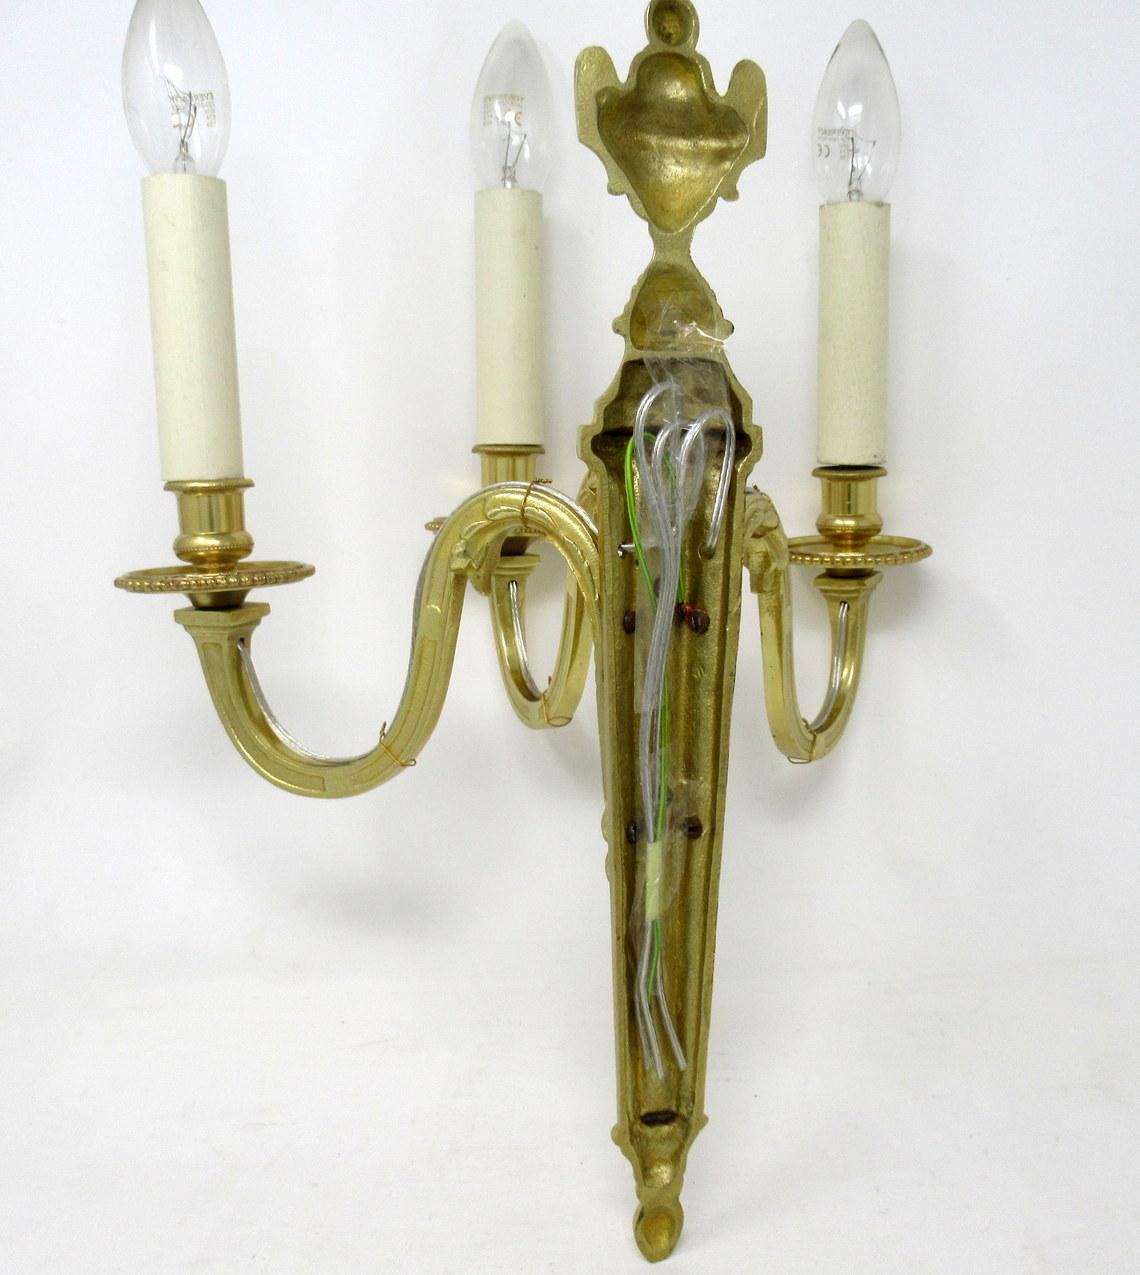 bronze wall candle sconces